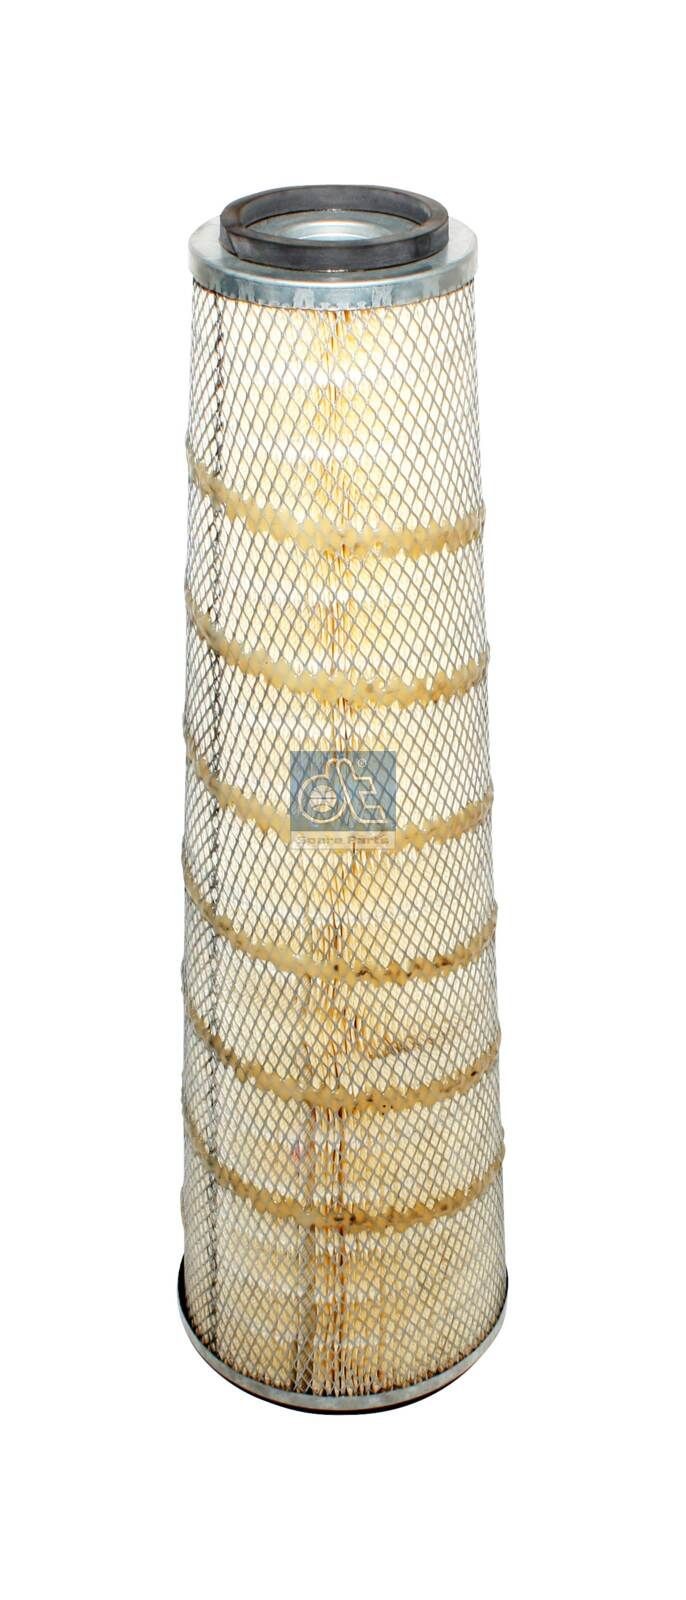 C 22 835 DT Spare Parts 4.65858 Air filter 2813043600